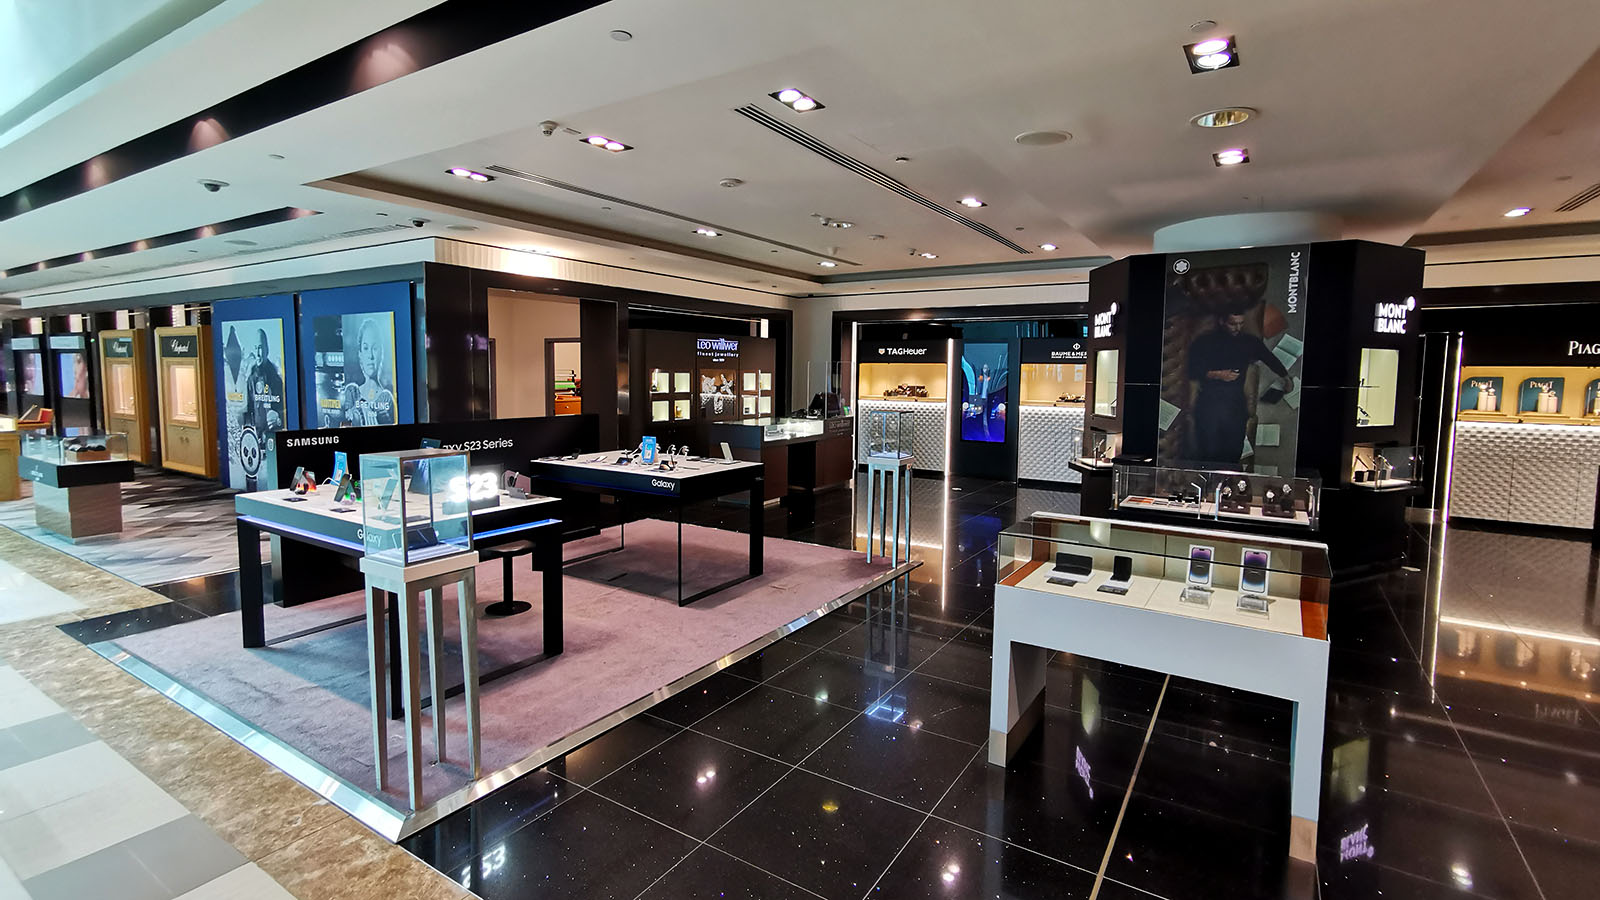 Buy technology in the Emirates First Class Lounge in Dubai Concourse A